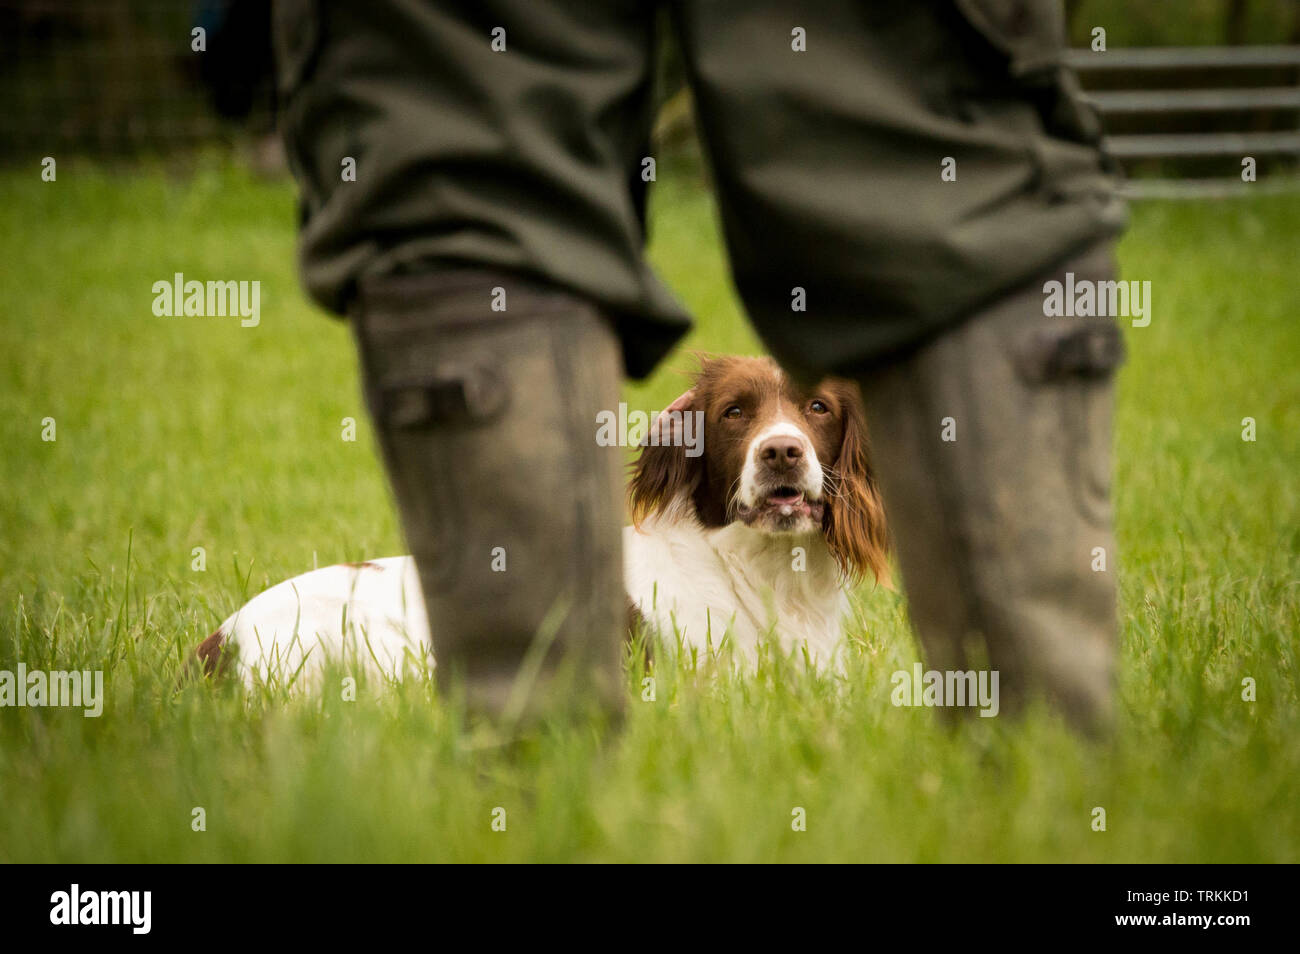 English Springer Spaniel dog lying down in a field by its owners wellington boots Stock Photo